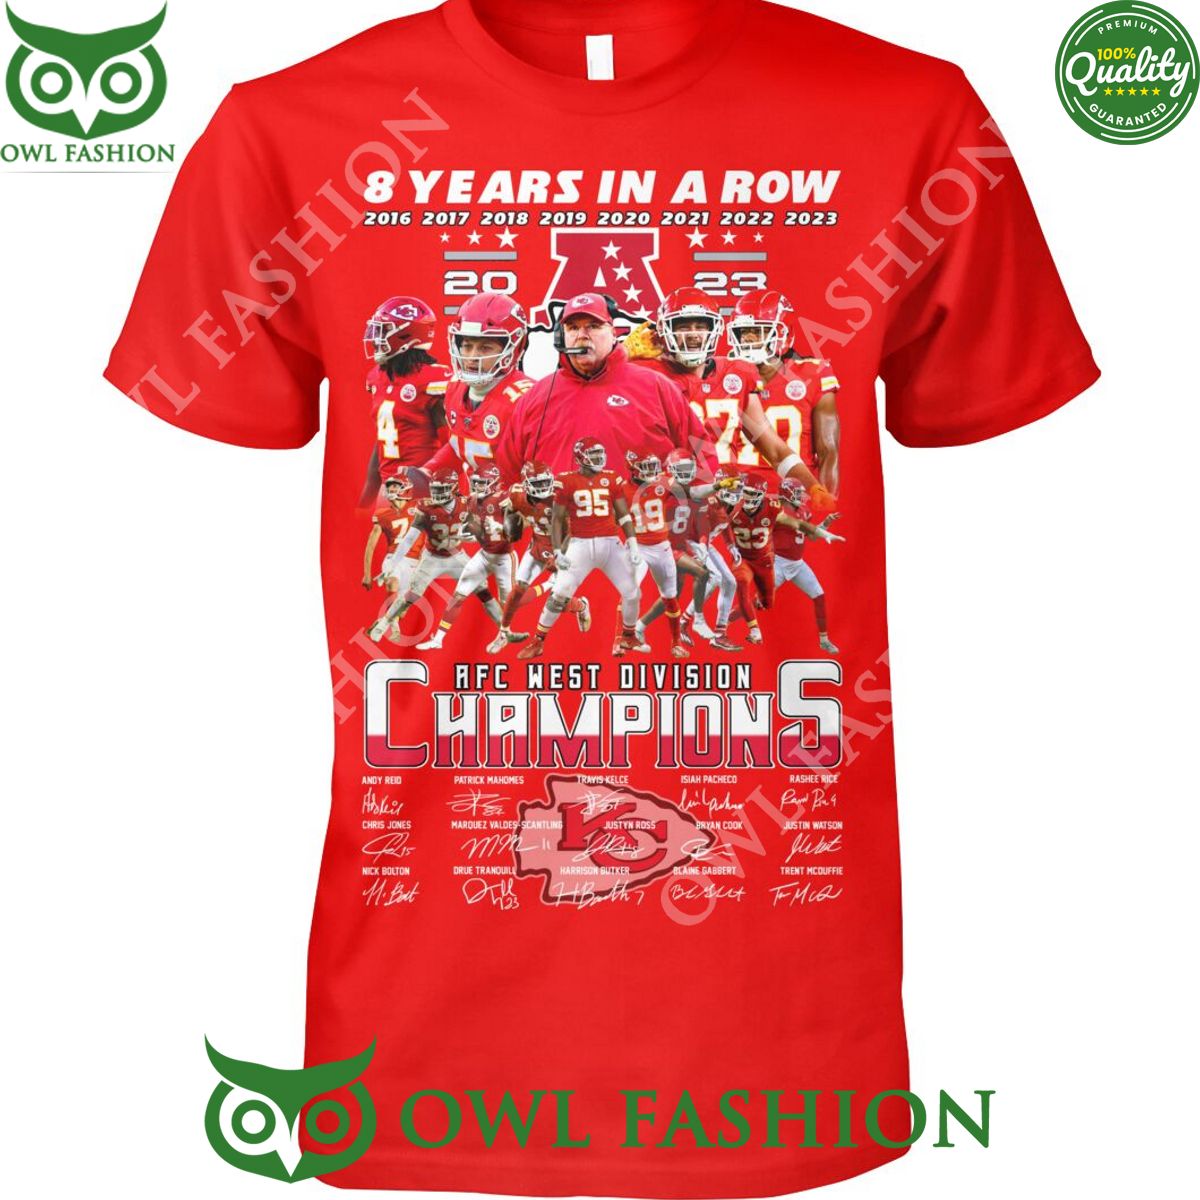 8 years in a row kc chiefs afc west division champions t shirt 1 nun4u.jpg